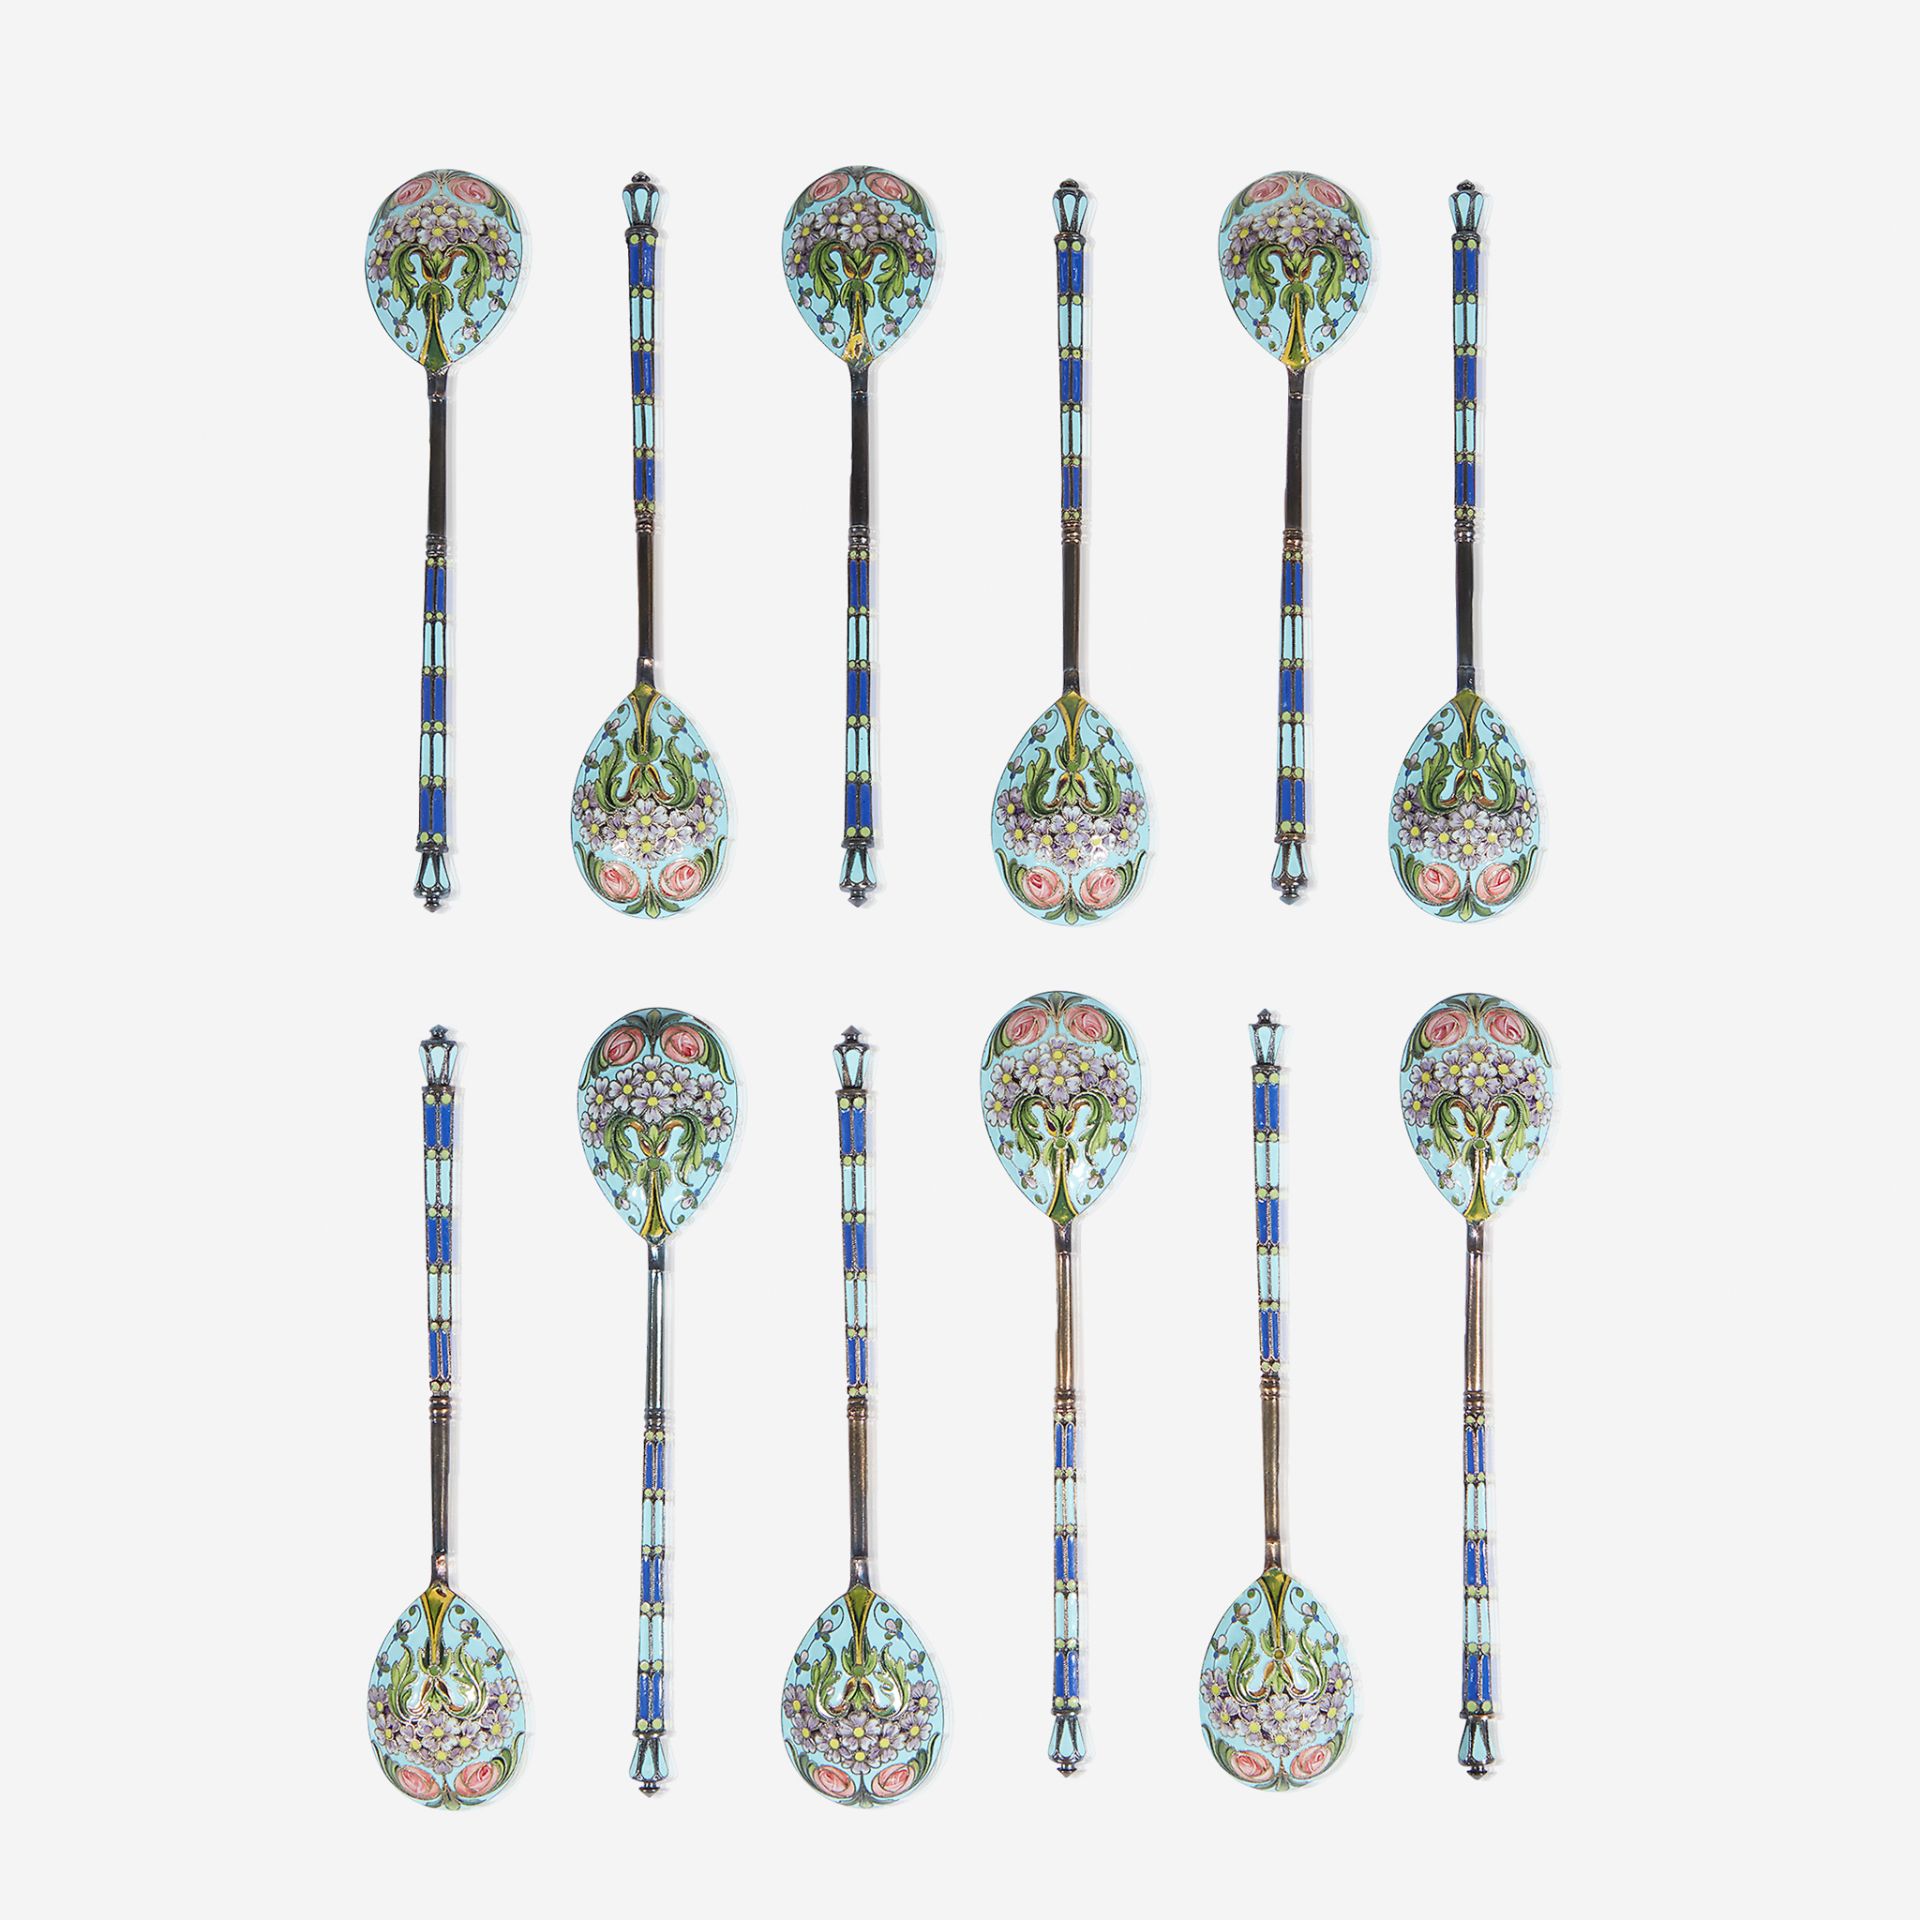 A group of twelve Russian silver-gilt and cloisonné enamel spoons, Ivan Khlebnikov, Moscow, circa 19